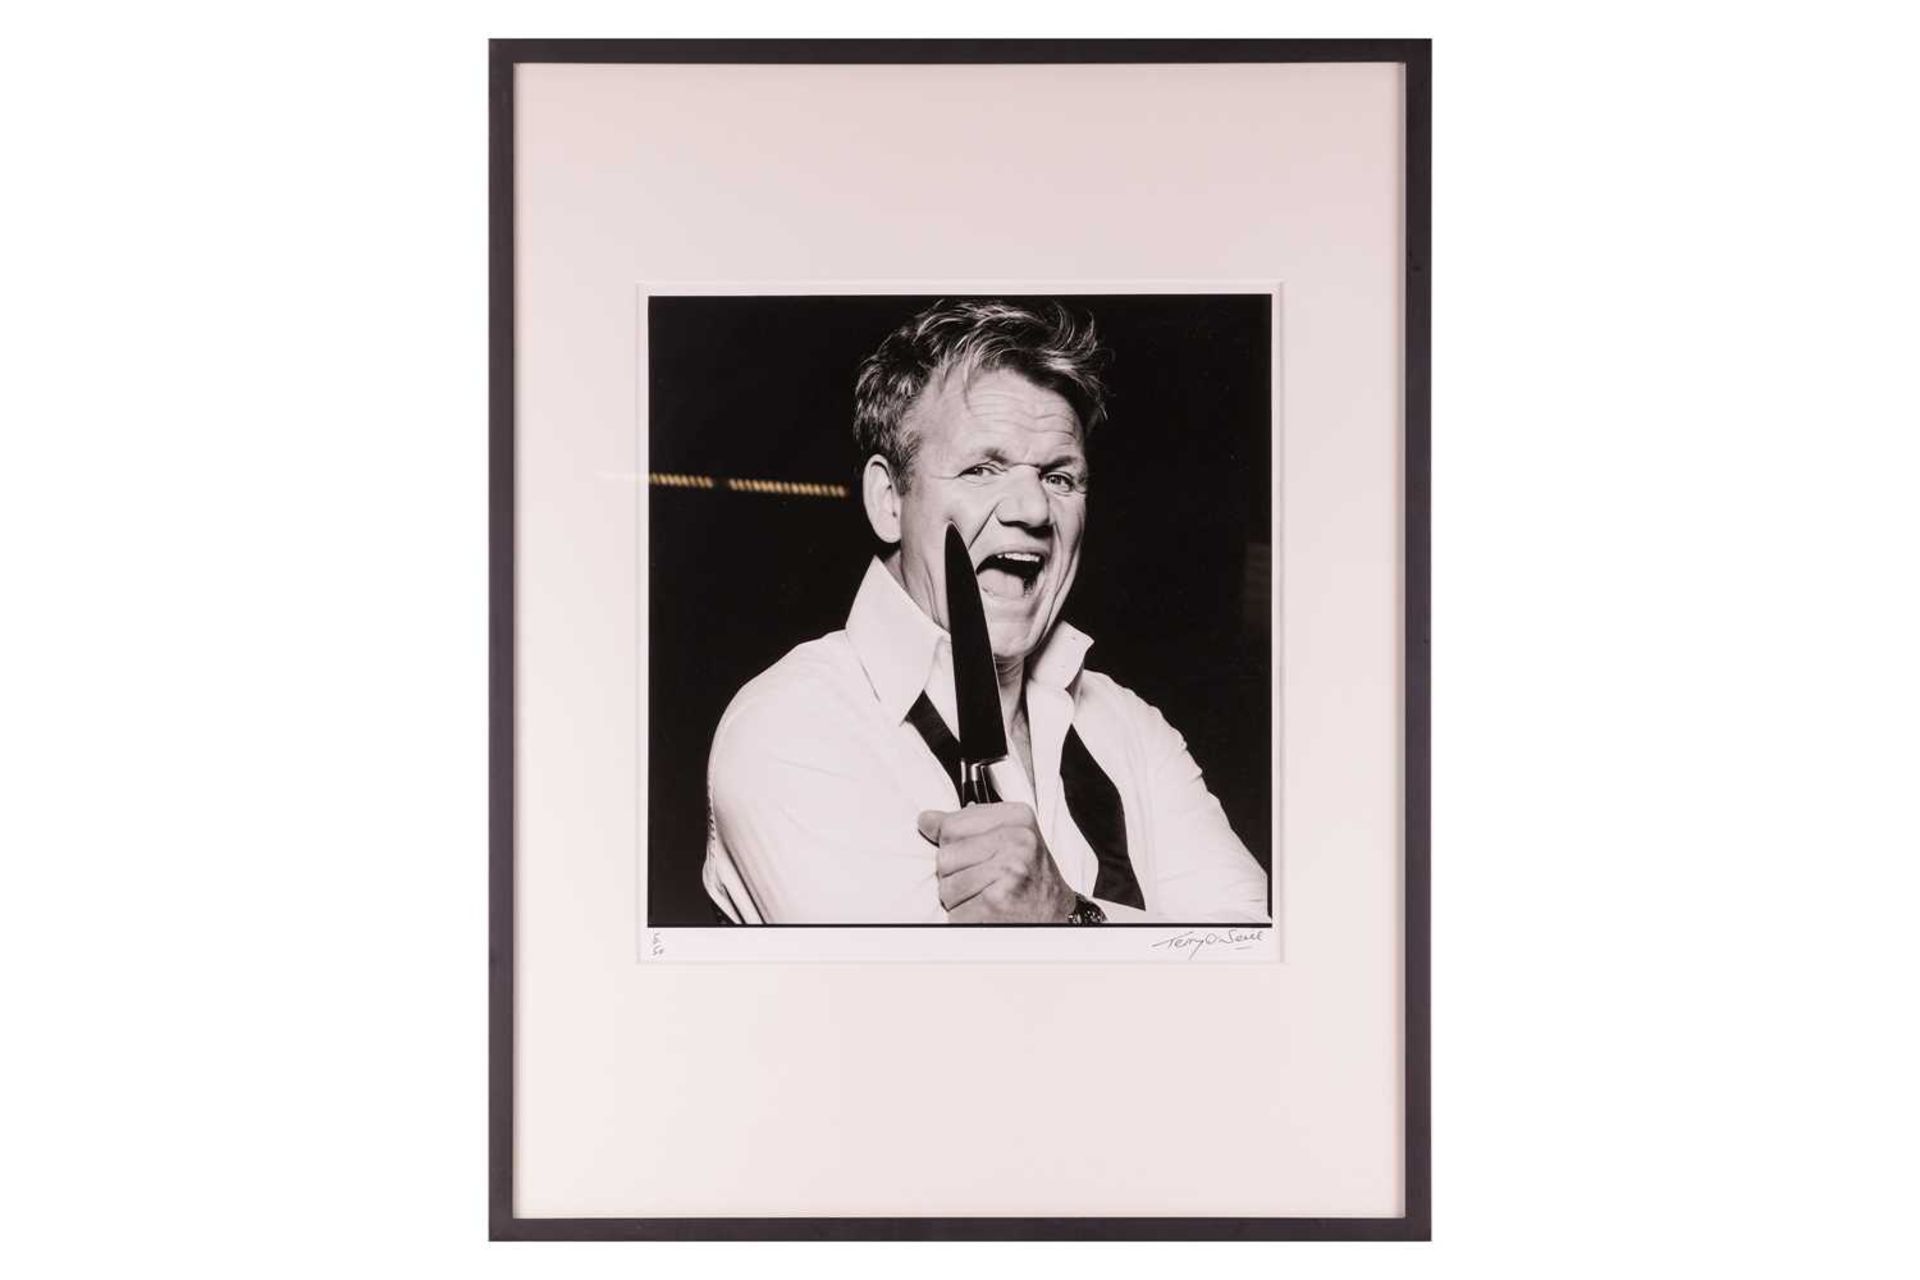 Terry O'Neill (1938 - 2019), Gordon Ramsay with Knife (2007), signed 'Terry O'Neill' (lower right) n